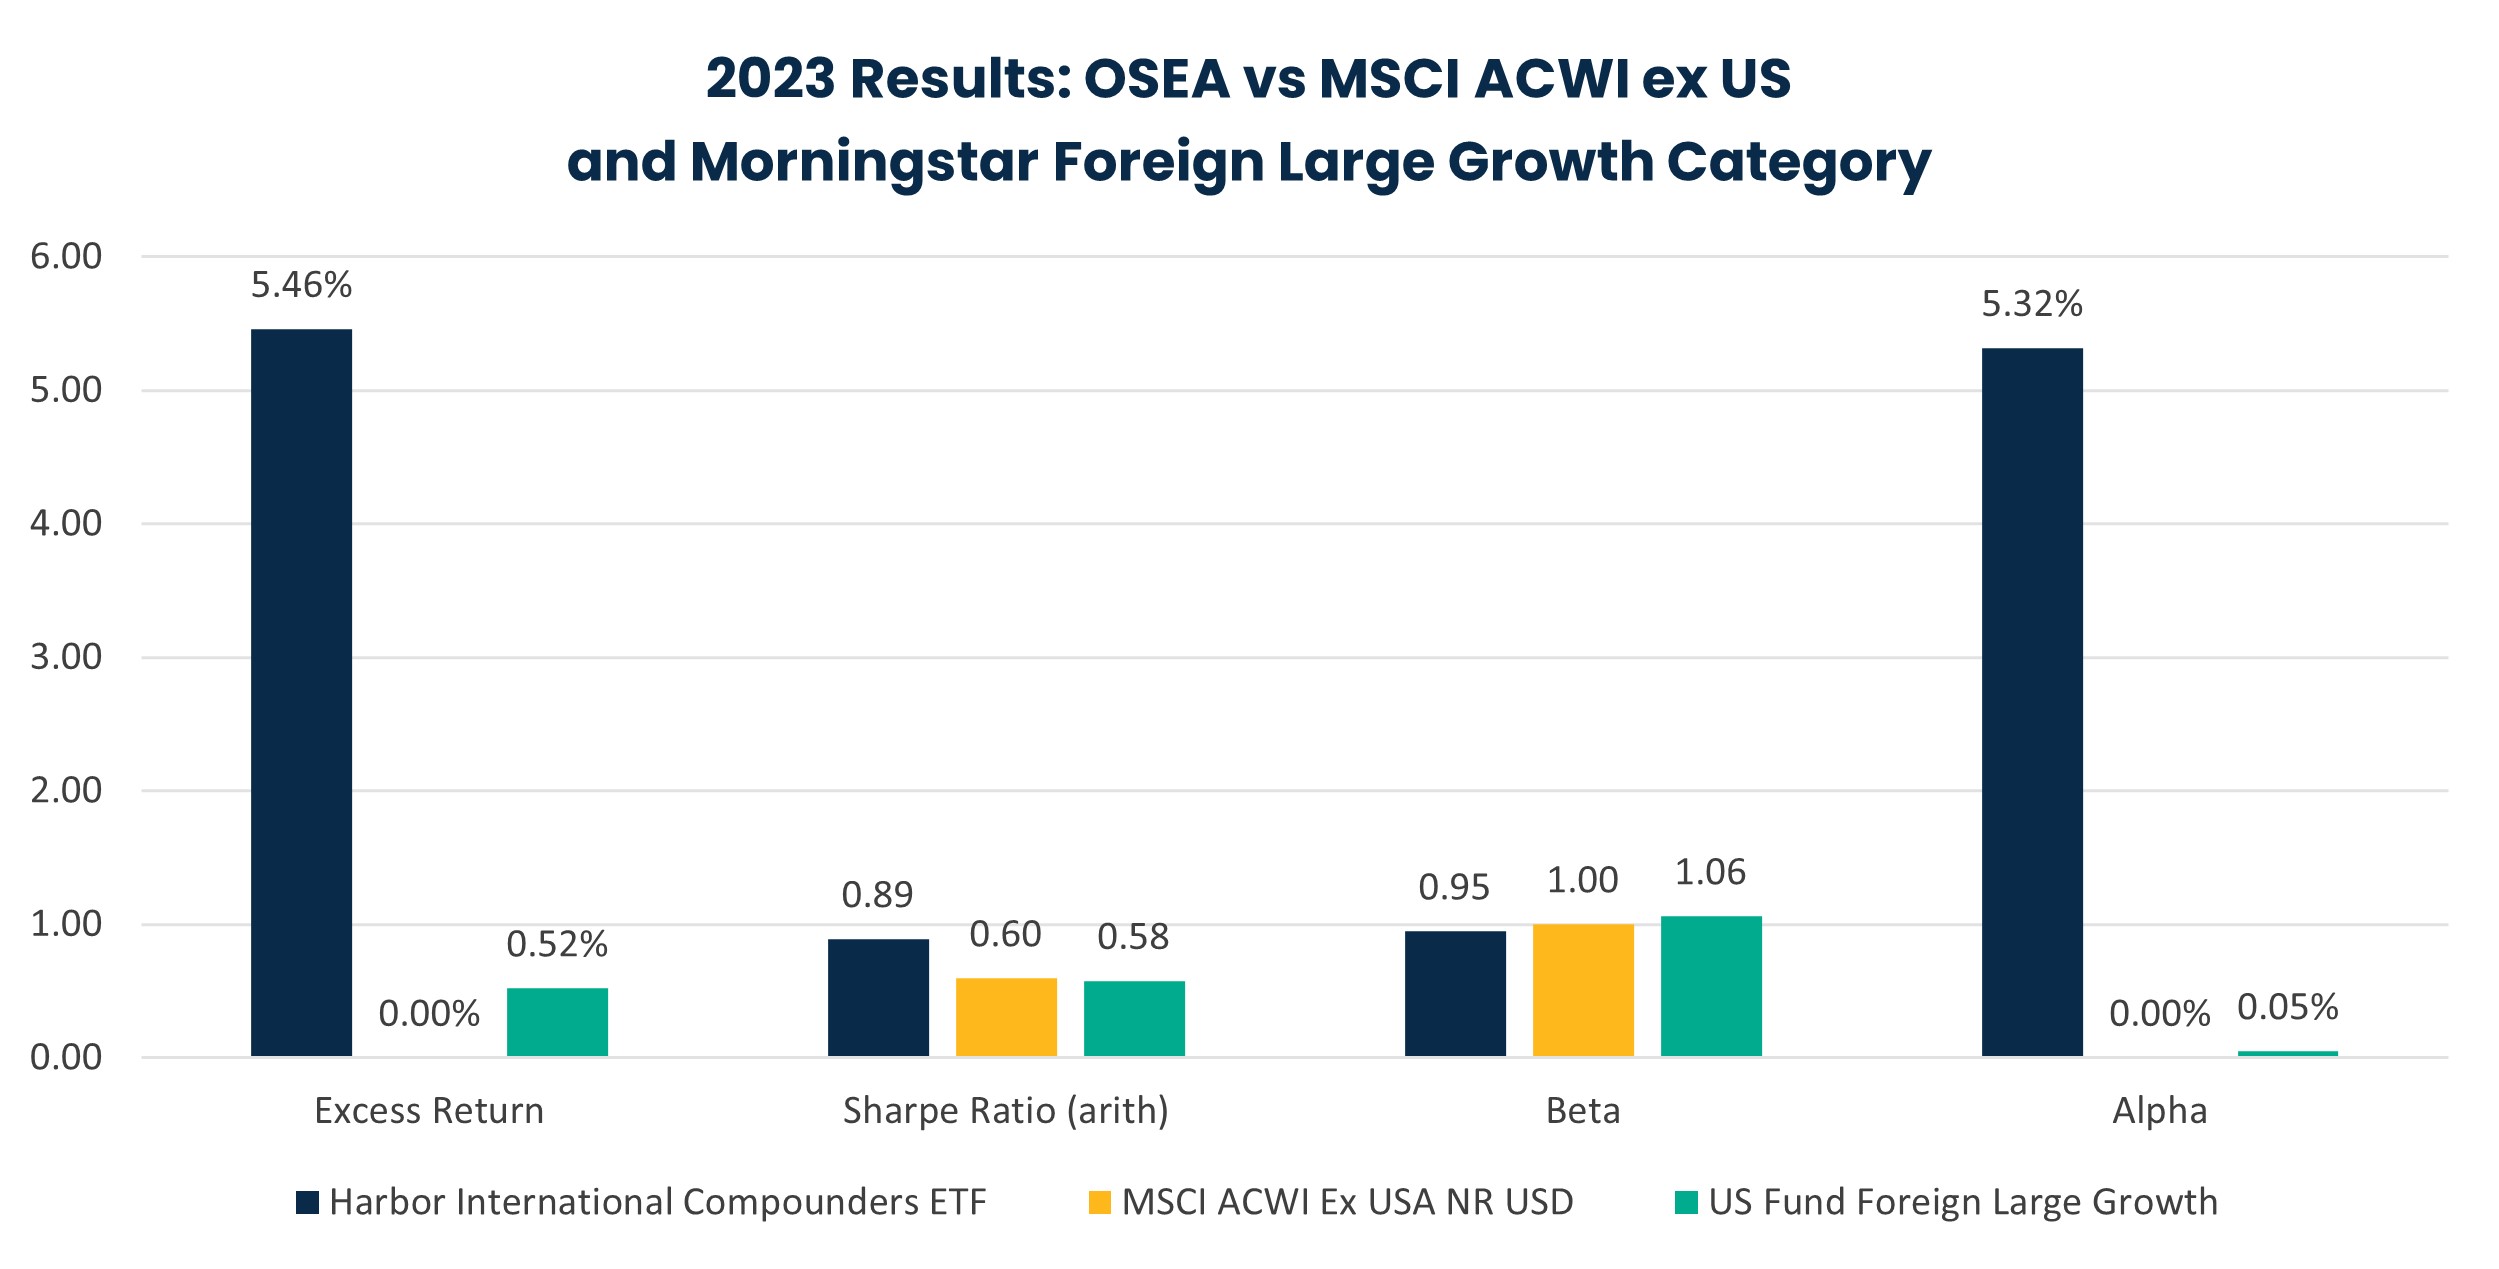 2023 Results: OSEA vs MSCI ACWI ex US and Morningstar Foreign Large Growth Category